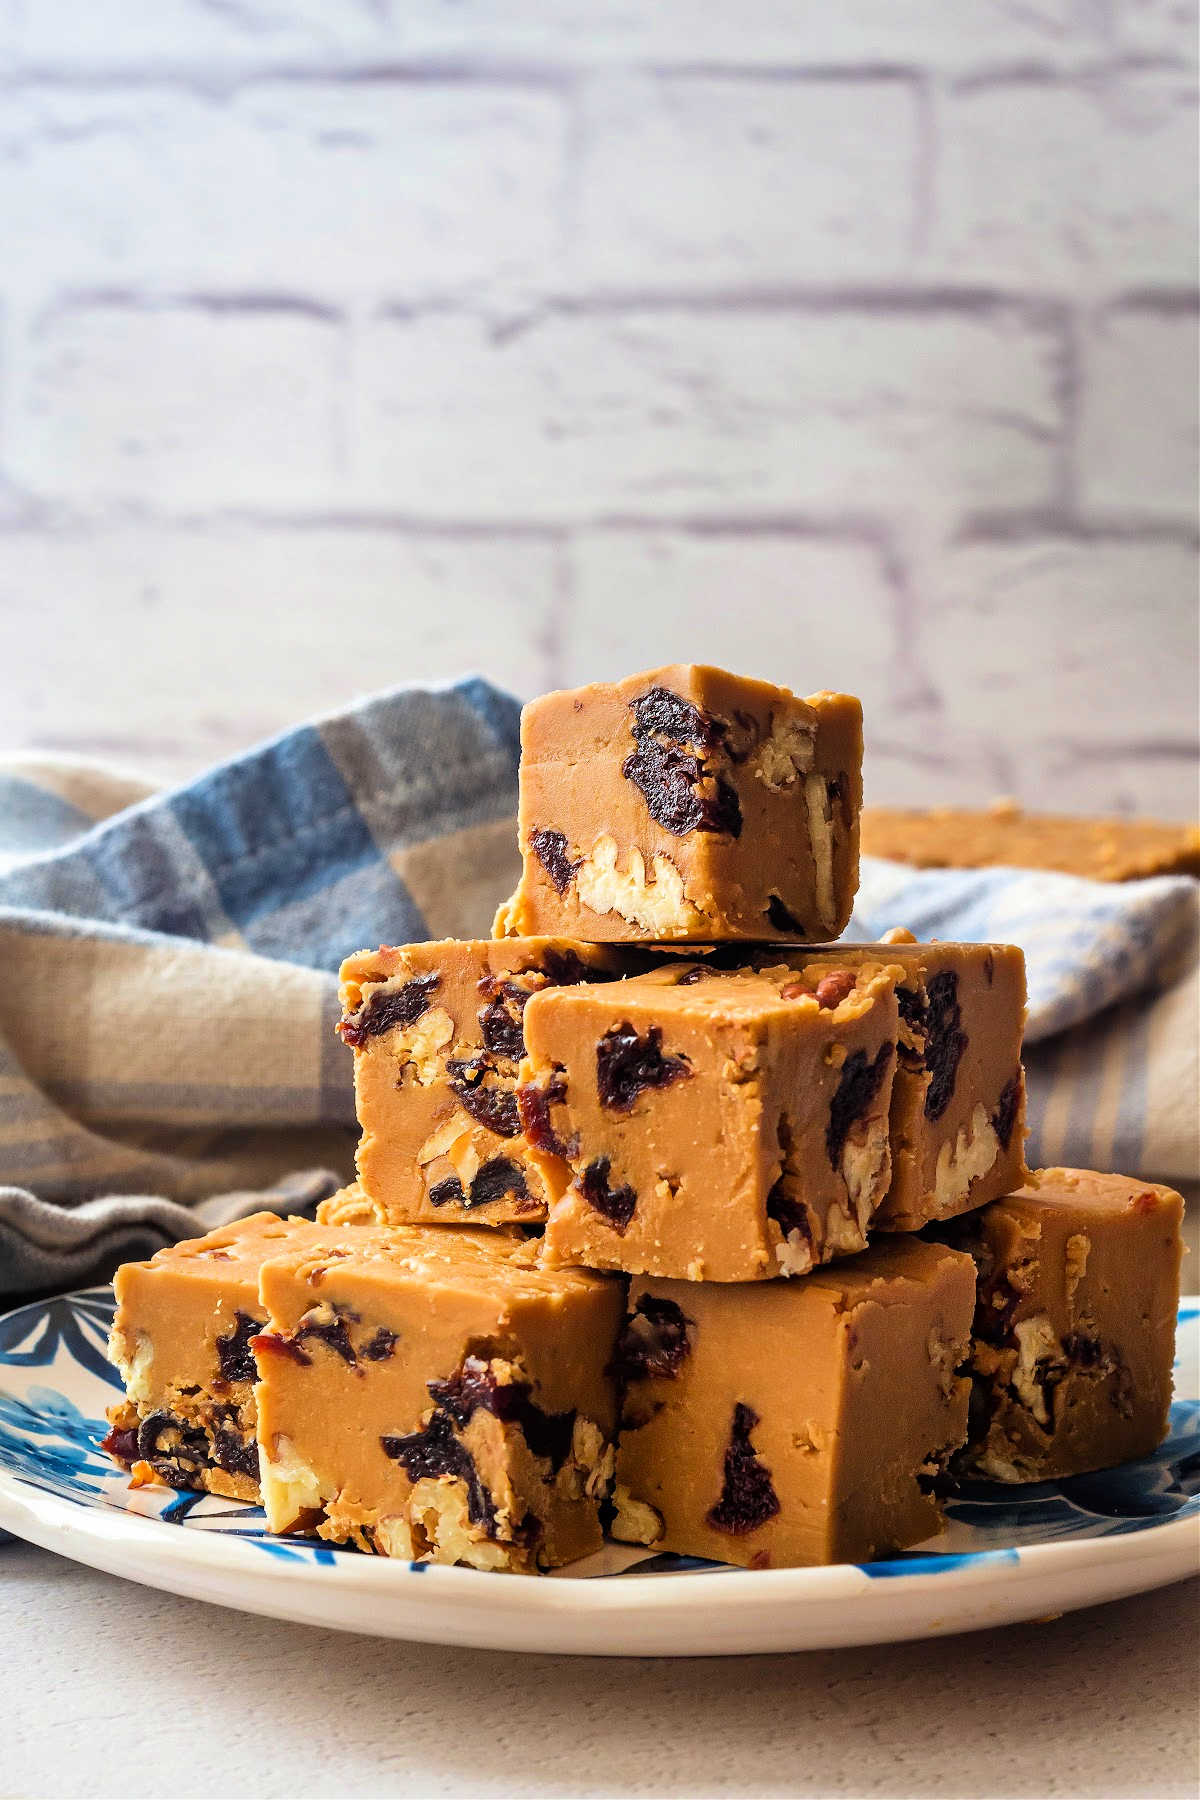 A blue plate with a stack of penuche fudge candies on it. The brown sugar fudge candies are studded with dried cherries and toasted pecans.